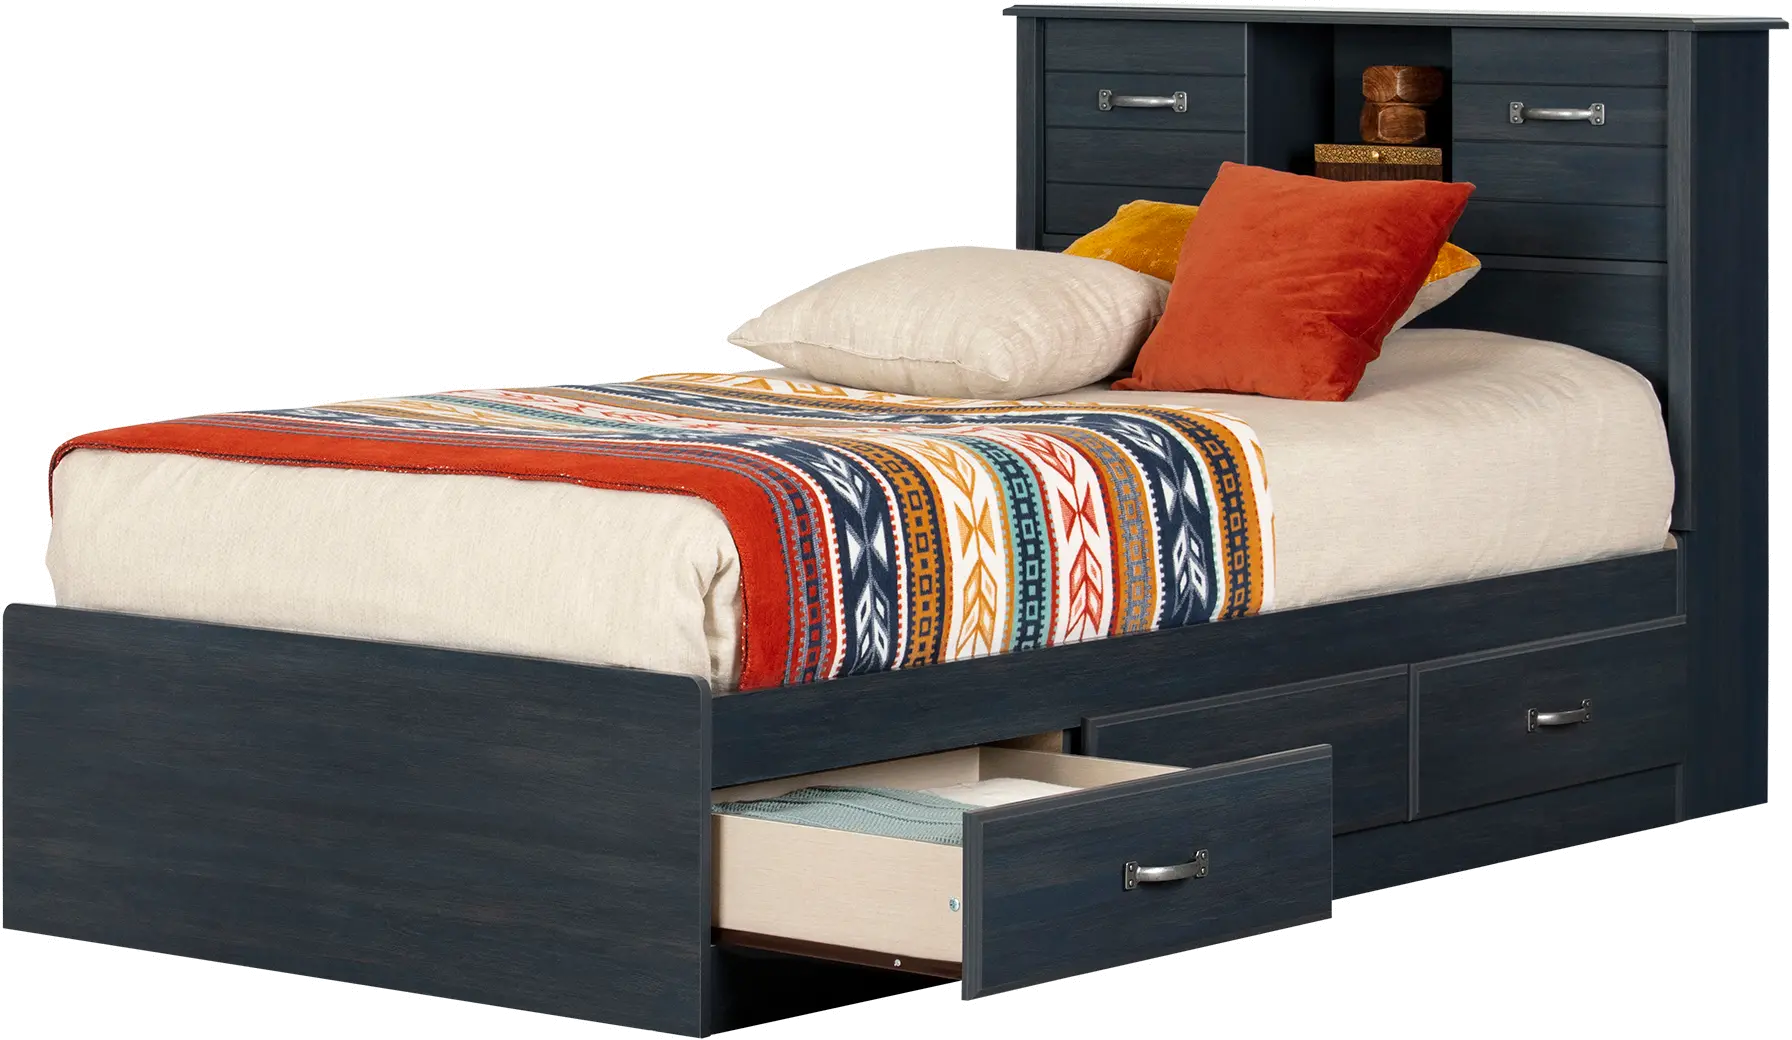 15132 Ulysses Blueberry Twin Bed and Headboard Set sku 15132